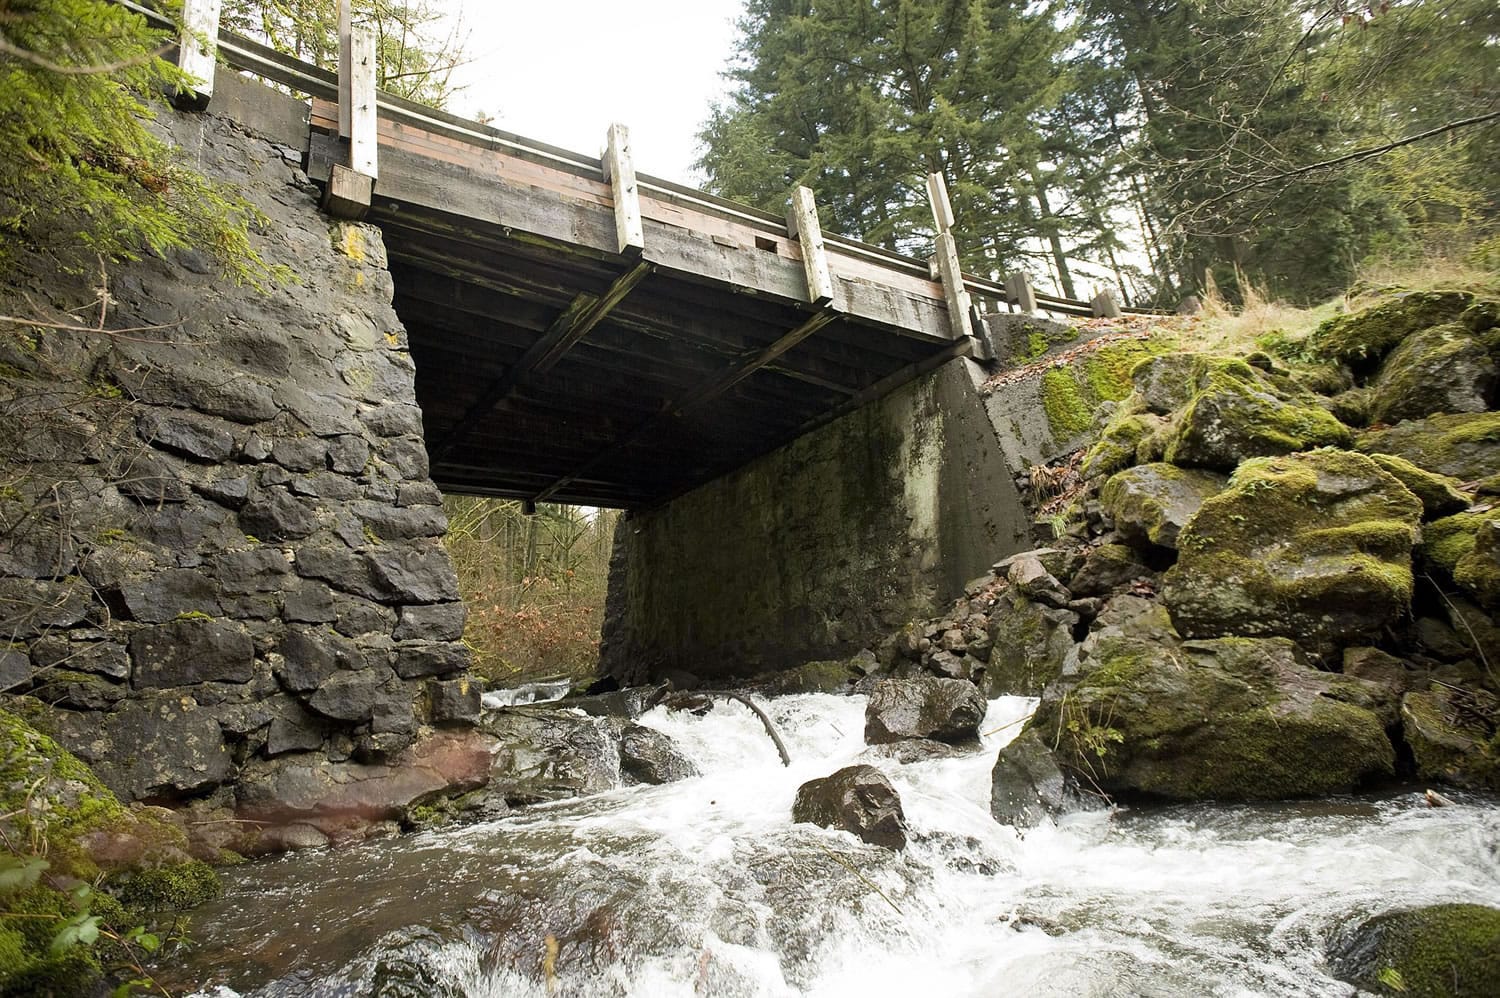 The Cougar Creek Bridge outside Washougal is slated for removal and replacement this summer. The short span, built in 1935, is one of only two remaining wooden bridges owned and maintained by Clark County.